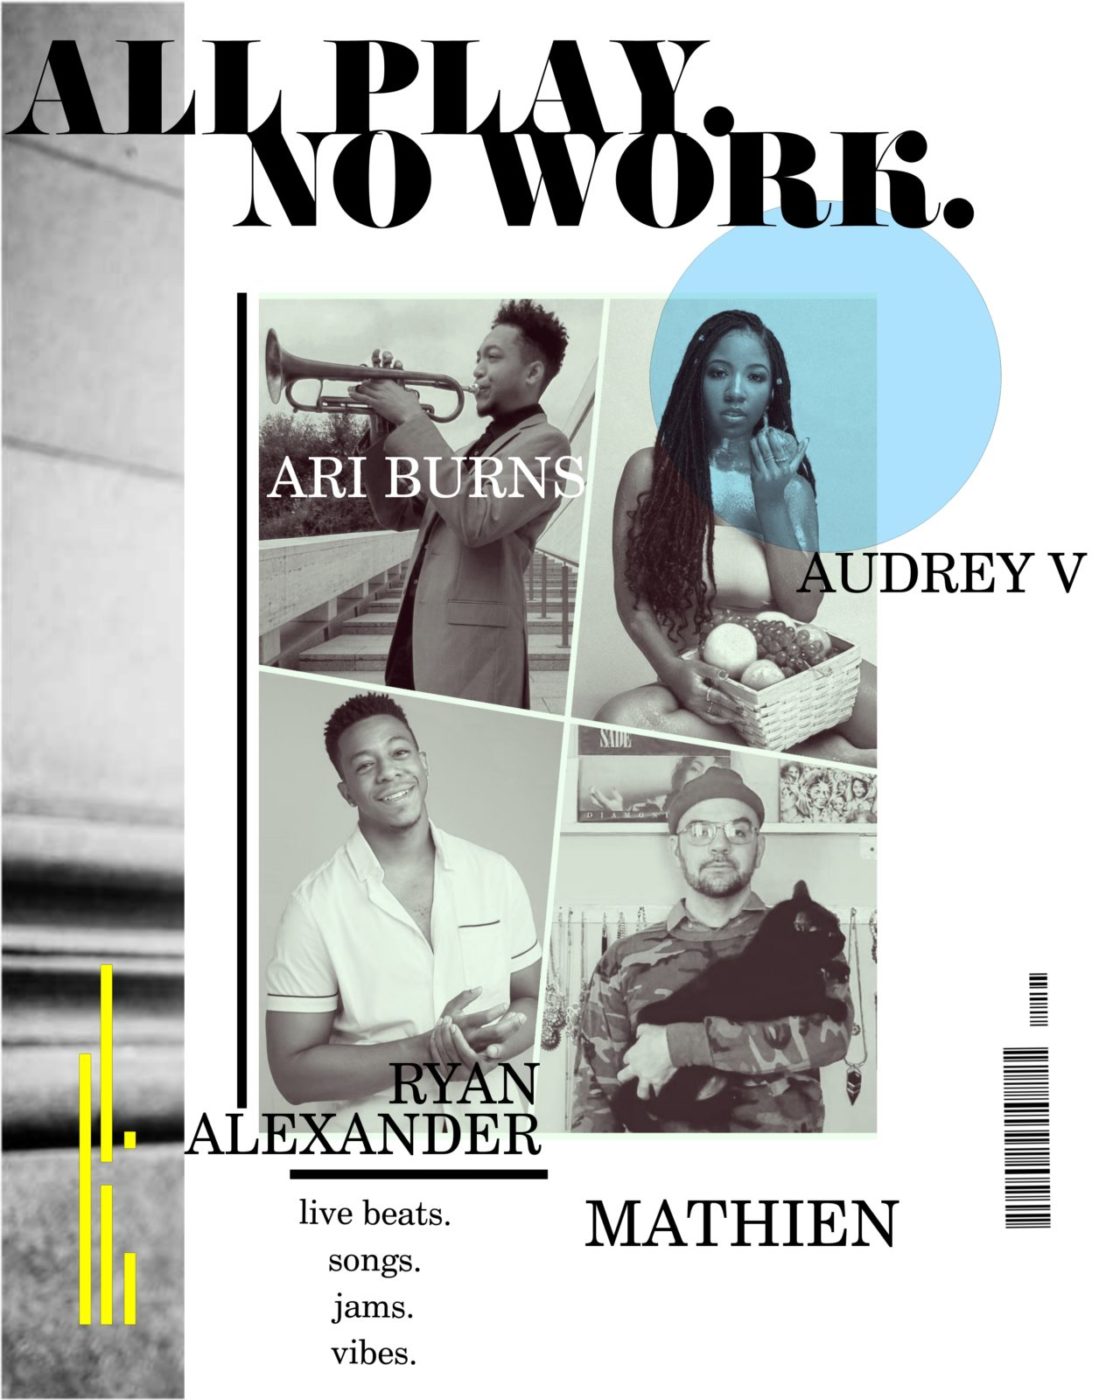 All Play No Work promo